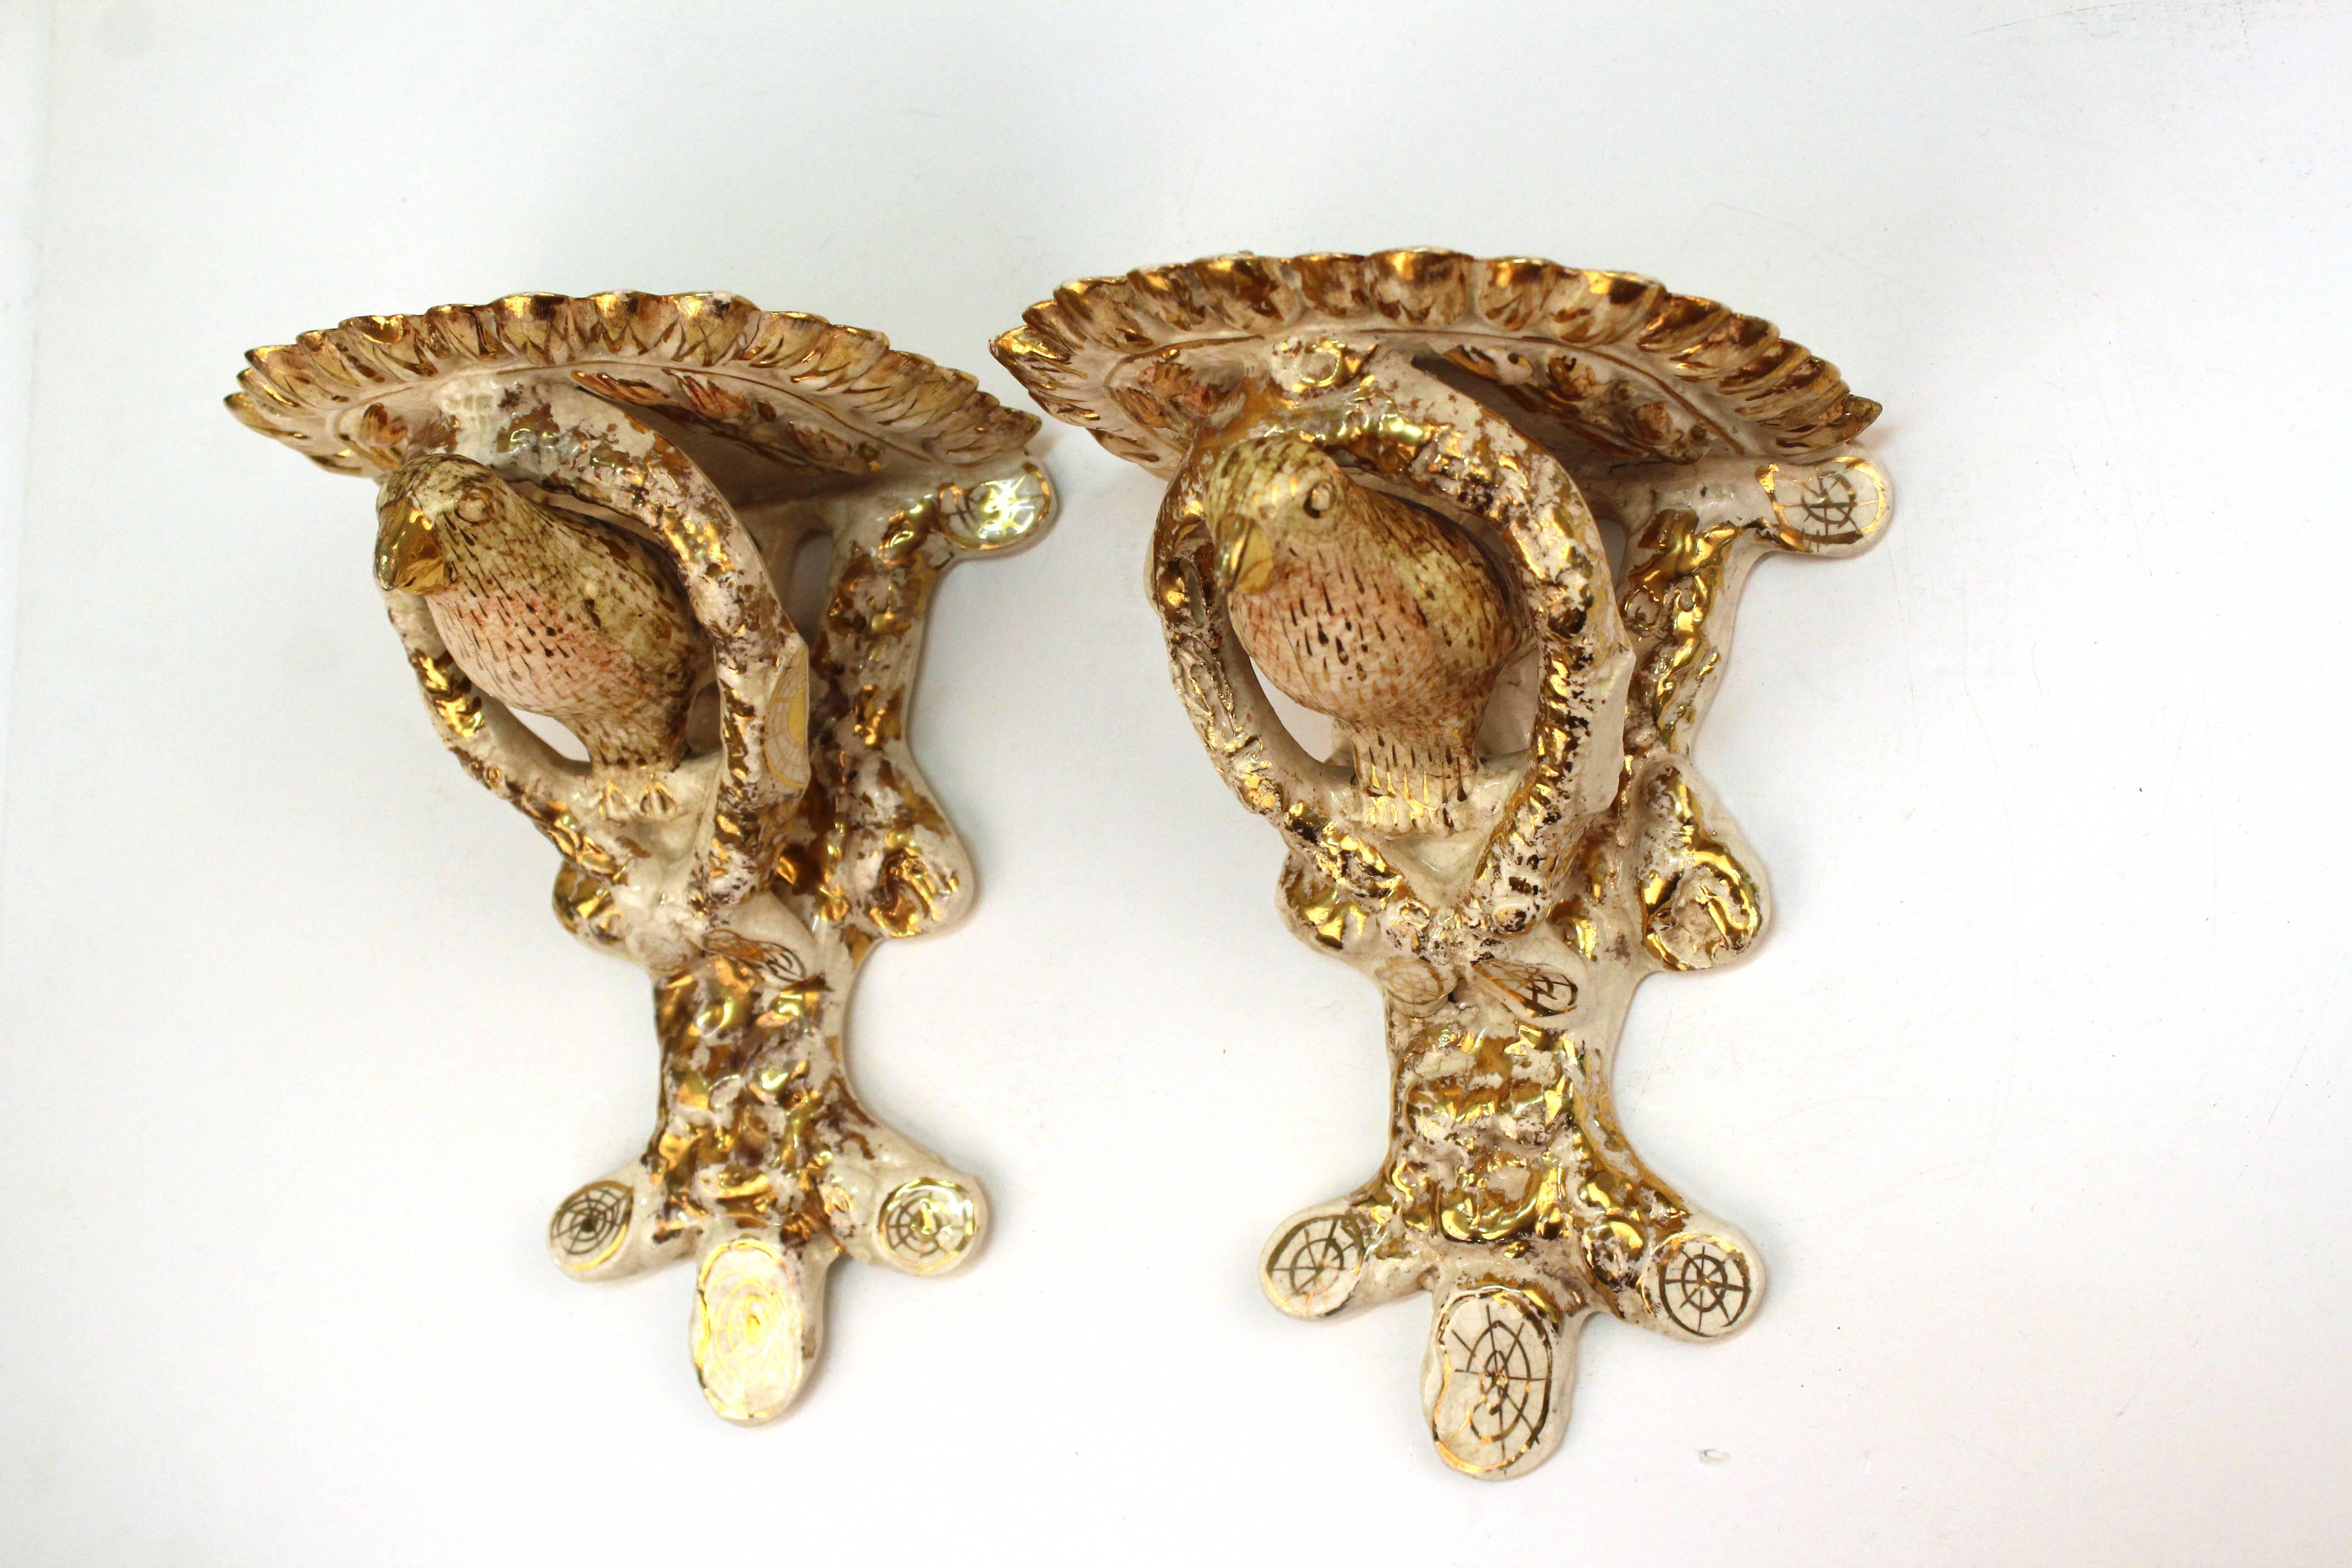 A pair of ceramic sconces with gold accents on white. Painted to look like birds sitting among tree branches. The birds feature gold beaks with pink washed bellies and pale green feathers also highlighted in gold. Minor wear to the ceramic due to